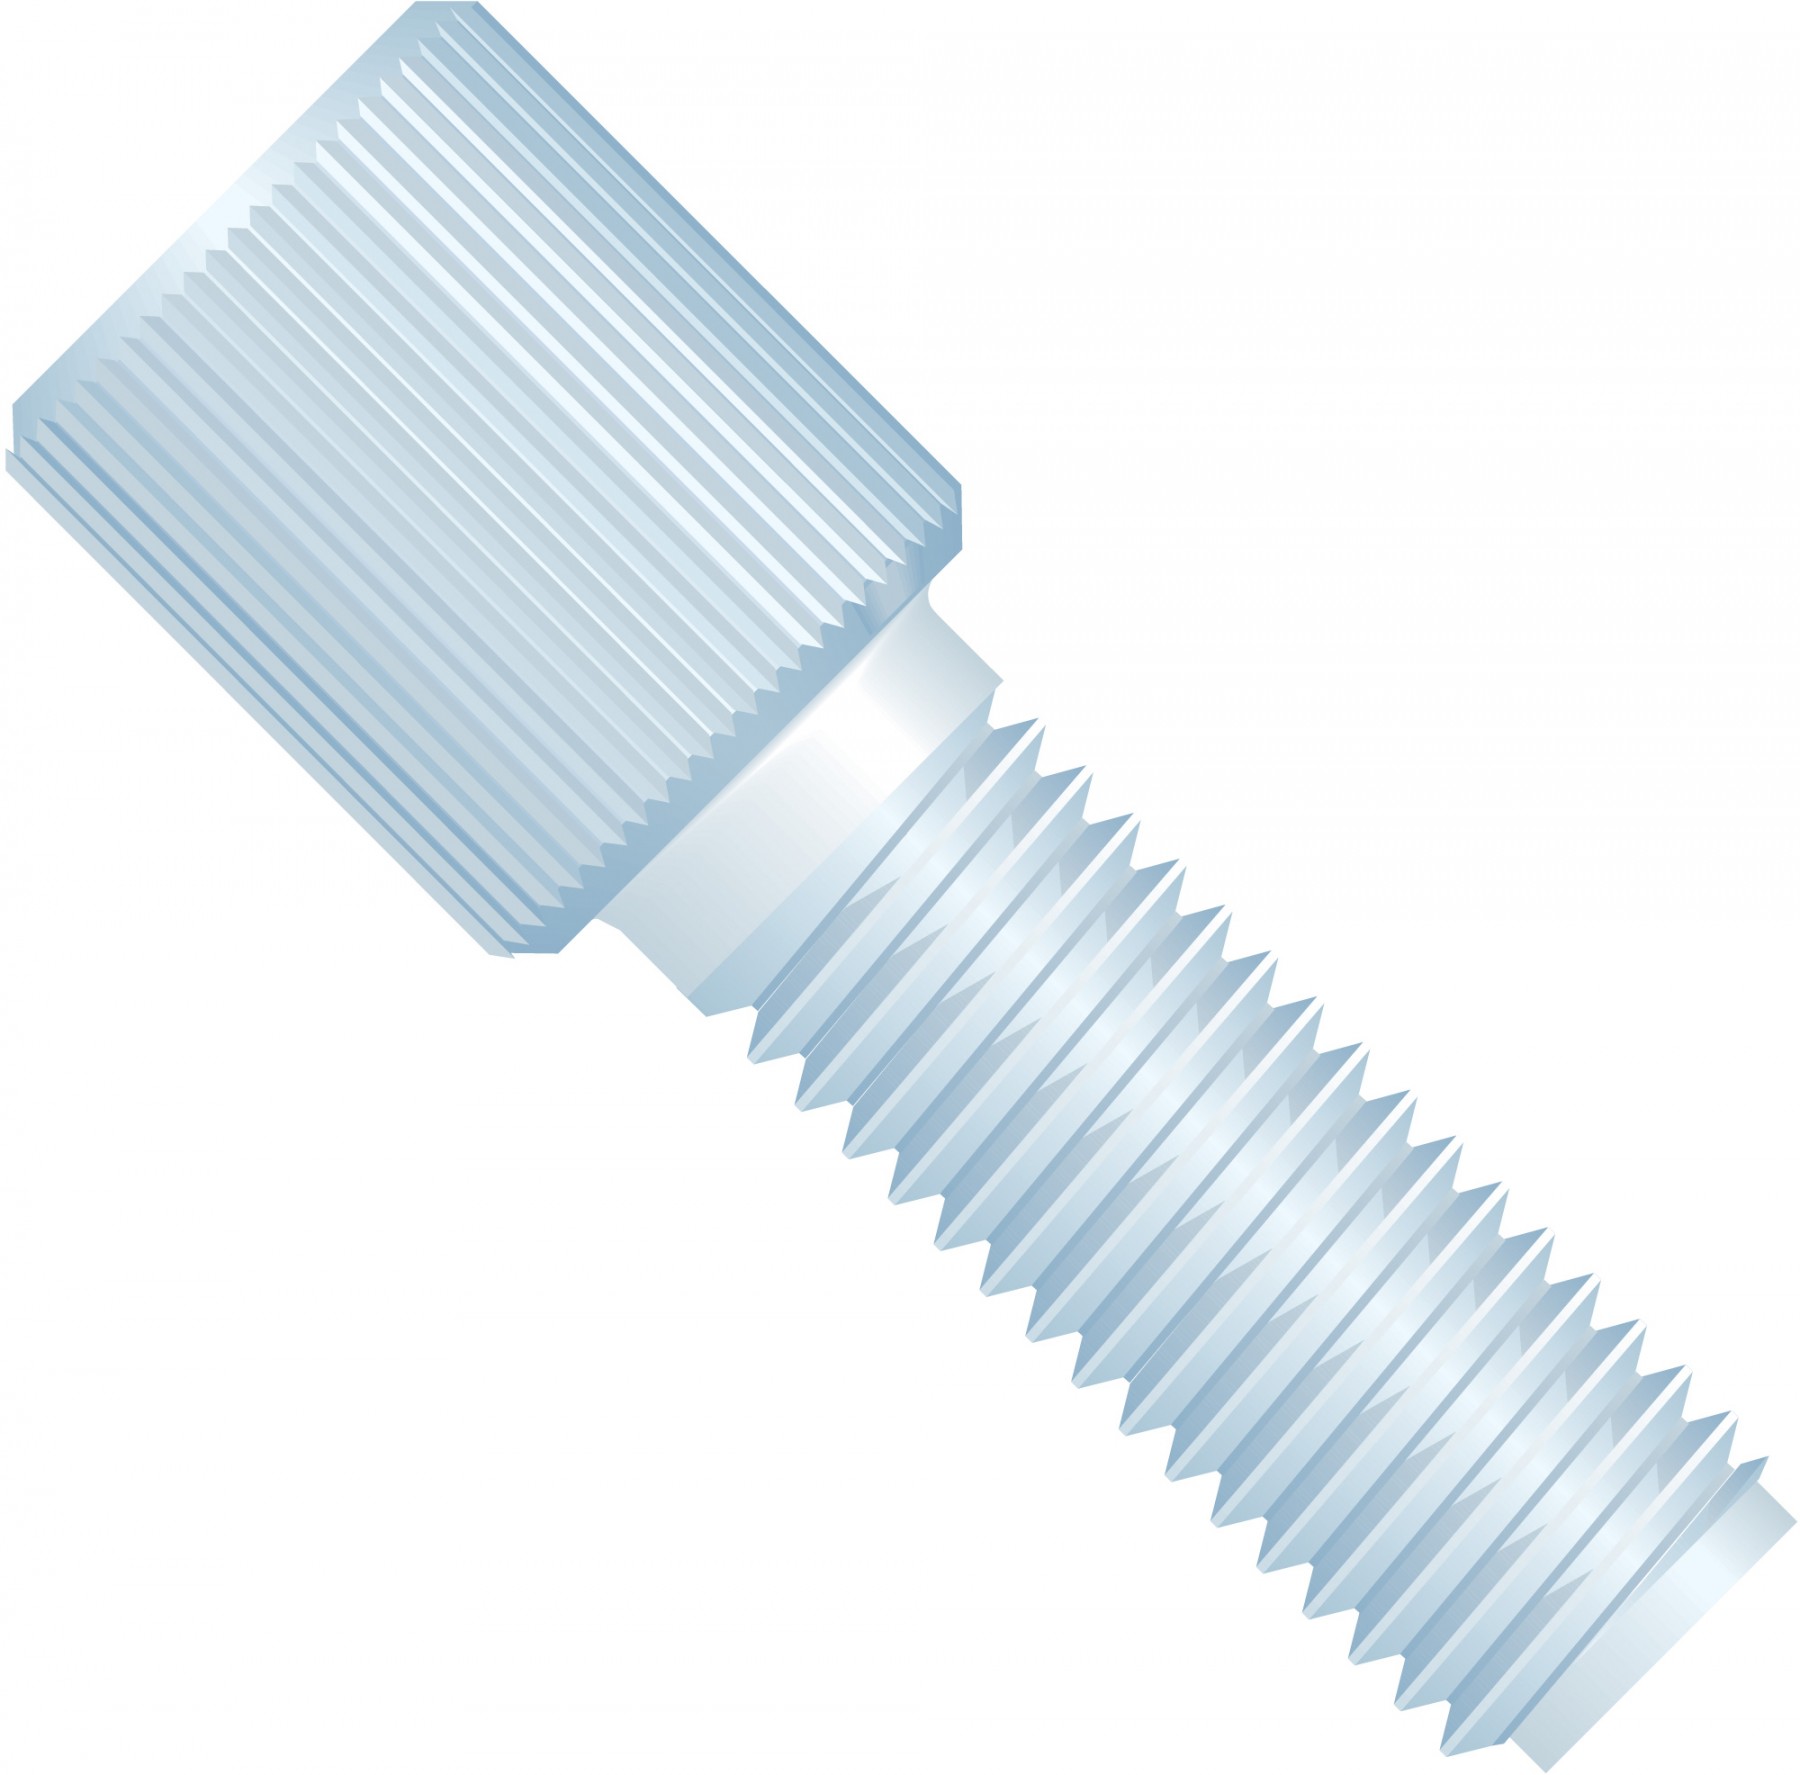 Adapters & Connectors: Threaded  Adapter, 1/4"-28 Flat Bottom (Female) to 1/4"-28 Flat Bottom (Male), PTFE